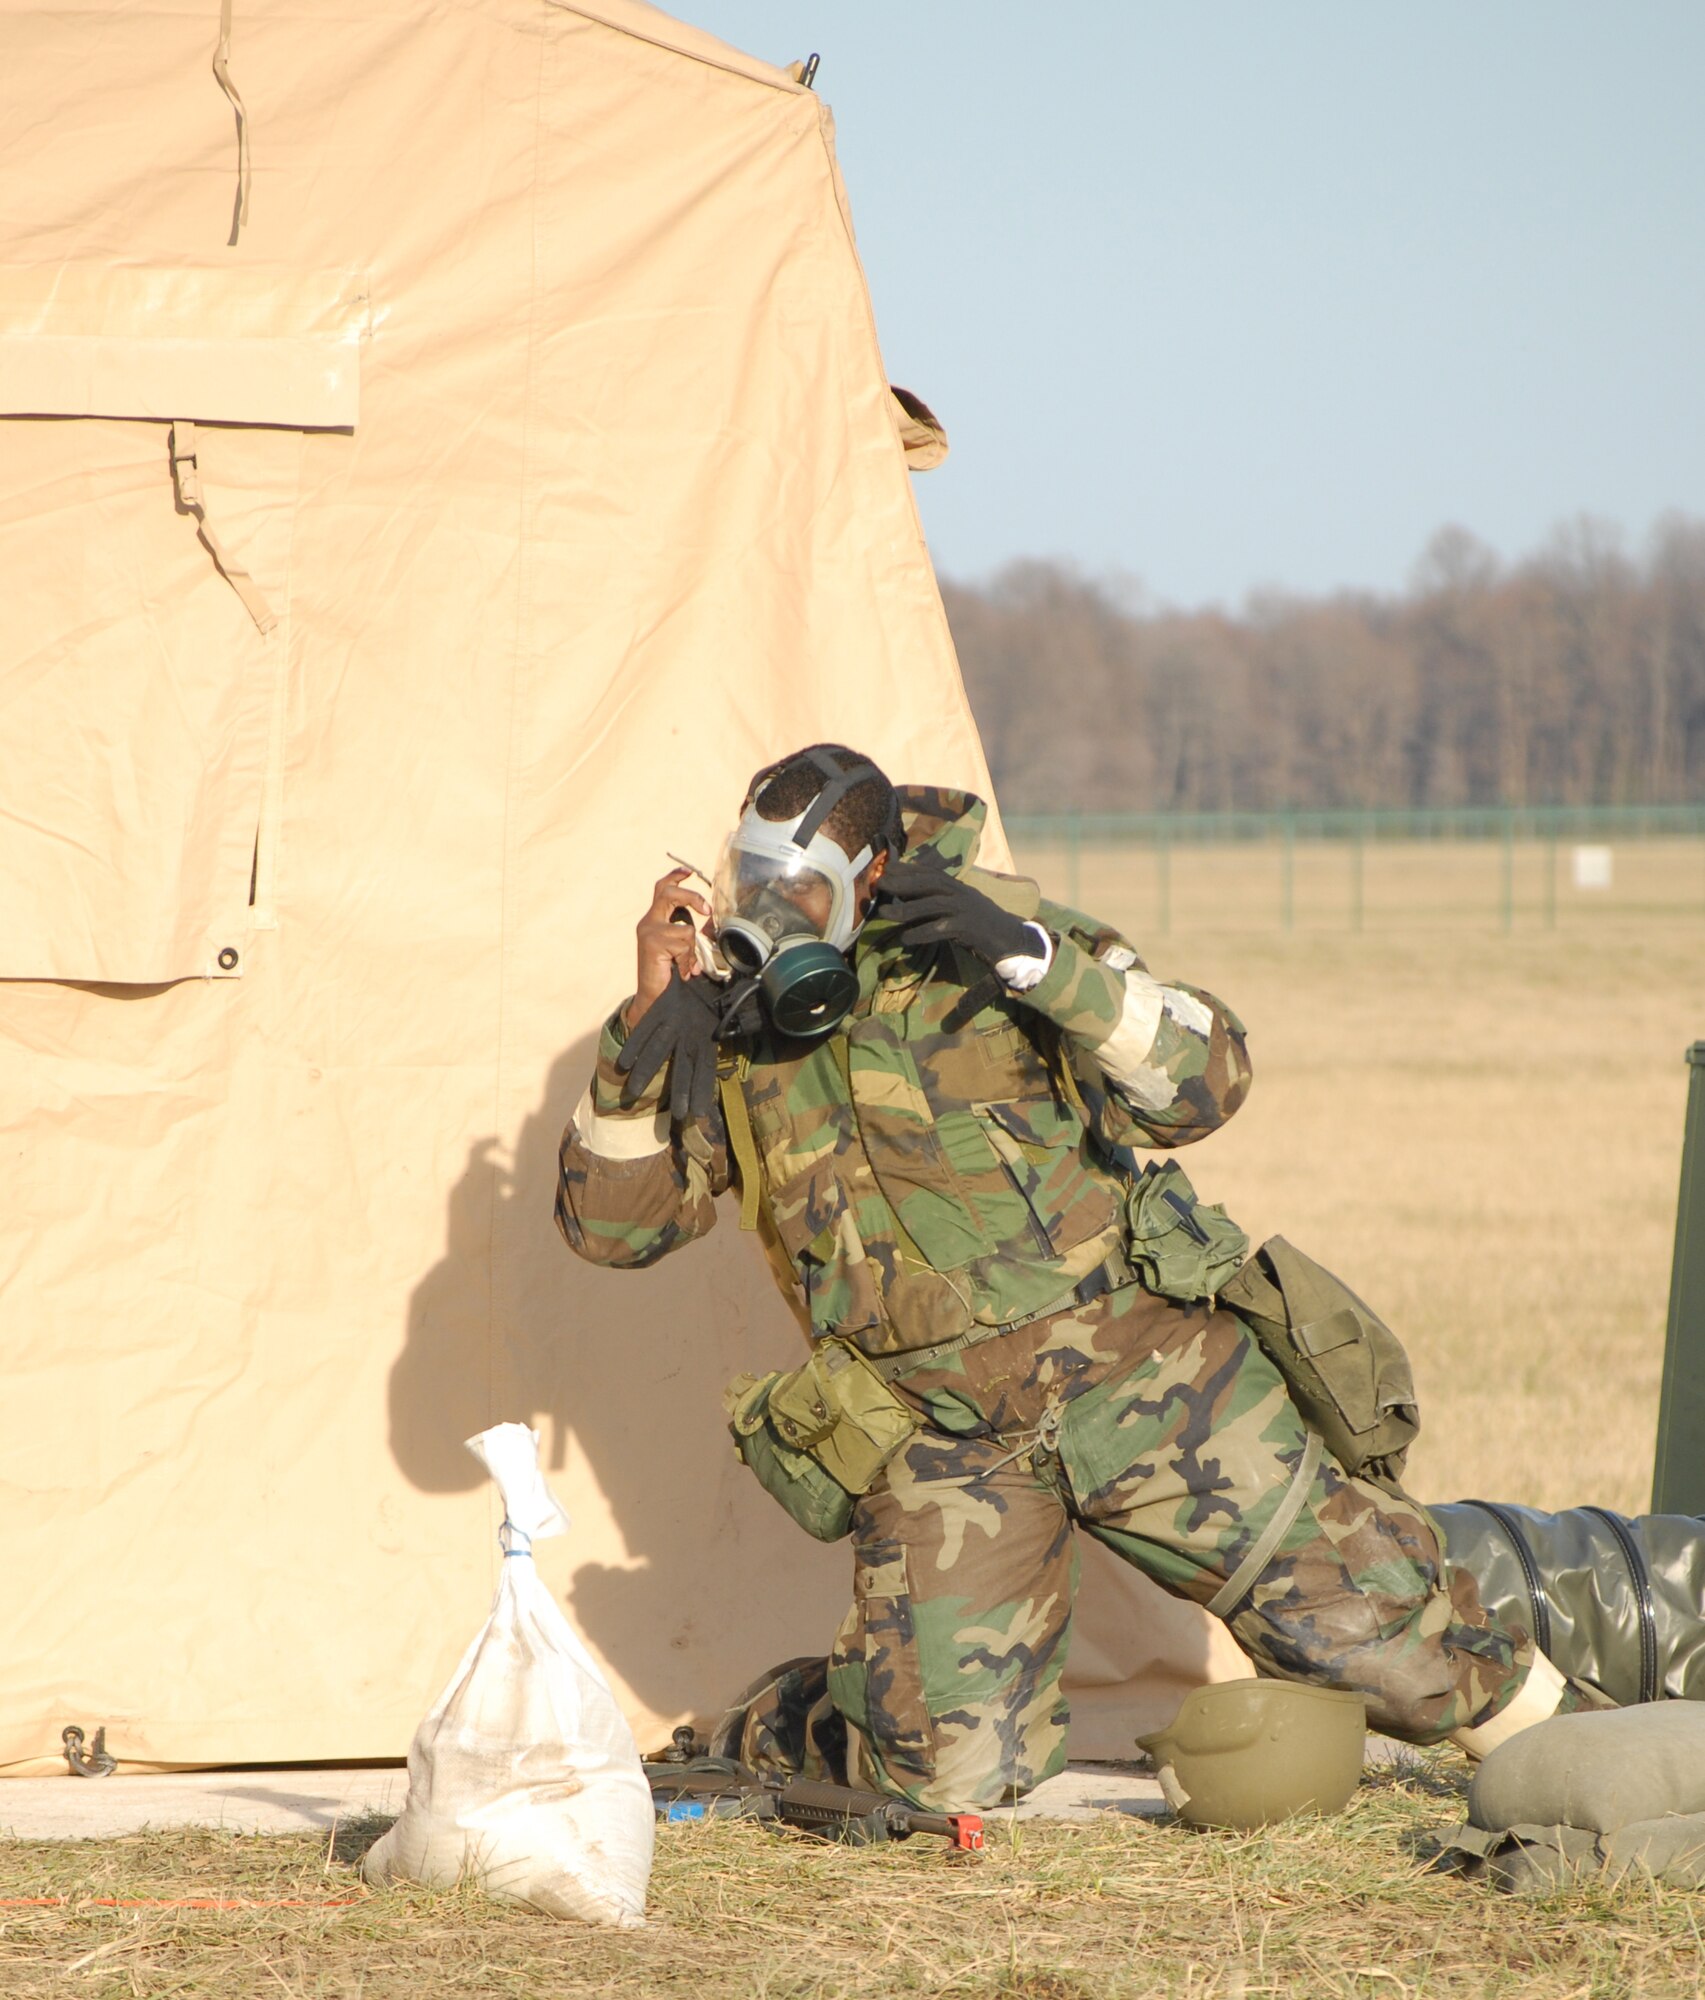 Staff Sgt. Martin Davis, 436th Services Squadron, removes his gas mask during the Dover Air Force Base Haunted House Battle Axe exercise Jan. 7. During the exercise, alarm conditions varied. At this time, the alarm condition went from 'alarm black' to 'alarm yellow,' which permitted Sergeant Davis to remove some of his protection. (U.S. Air Force photo/Tech. Sgt. Kevin Wallace)